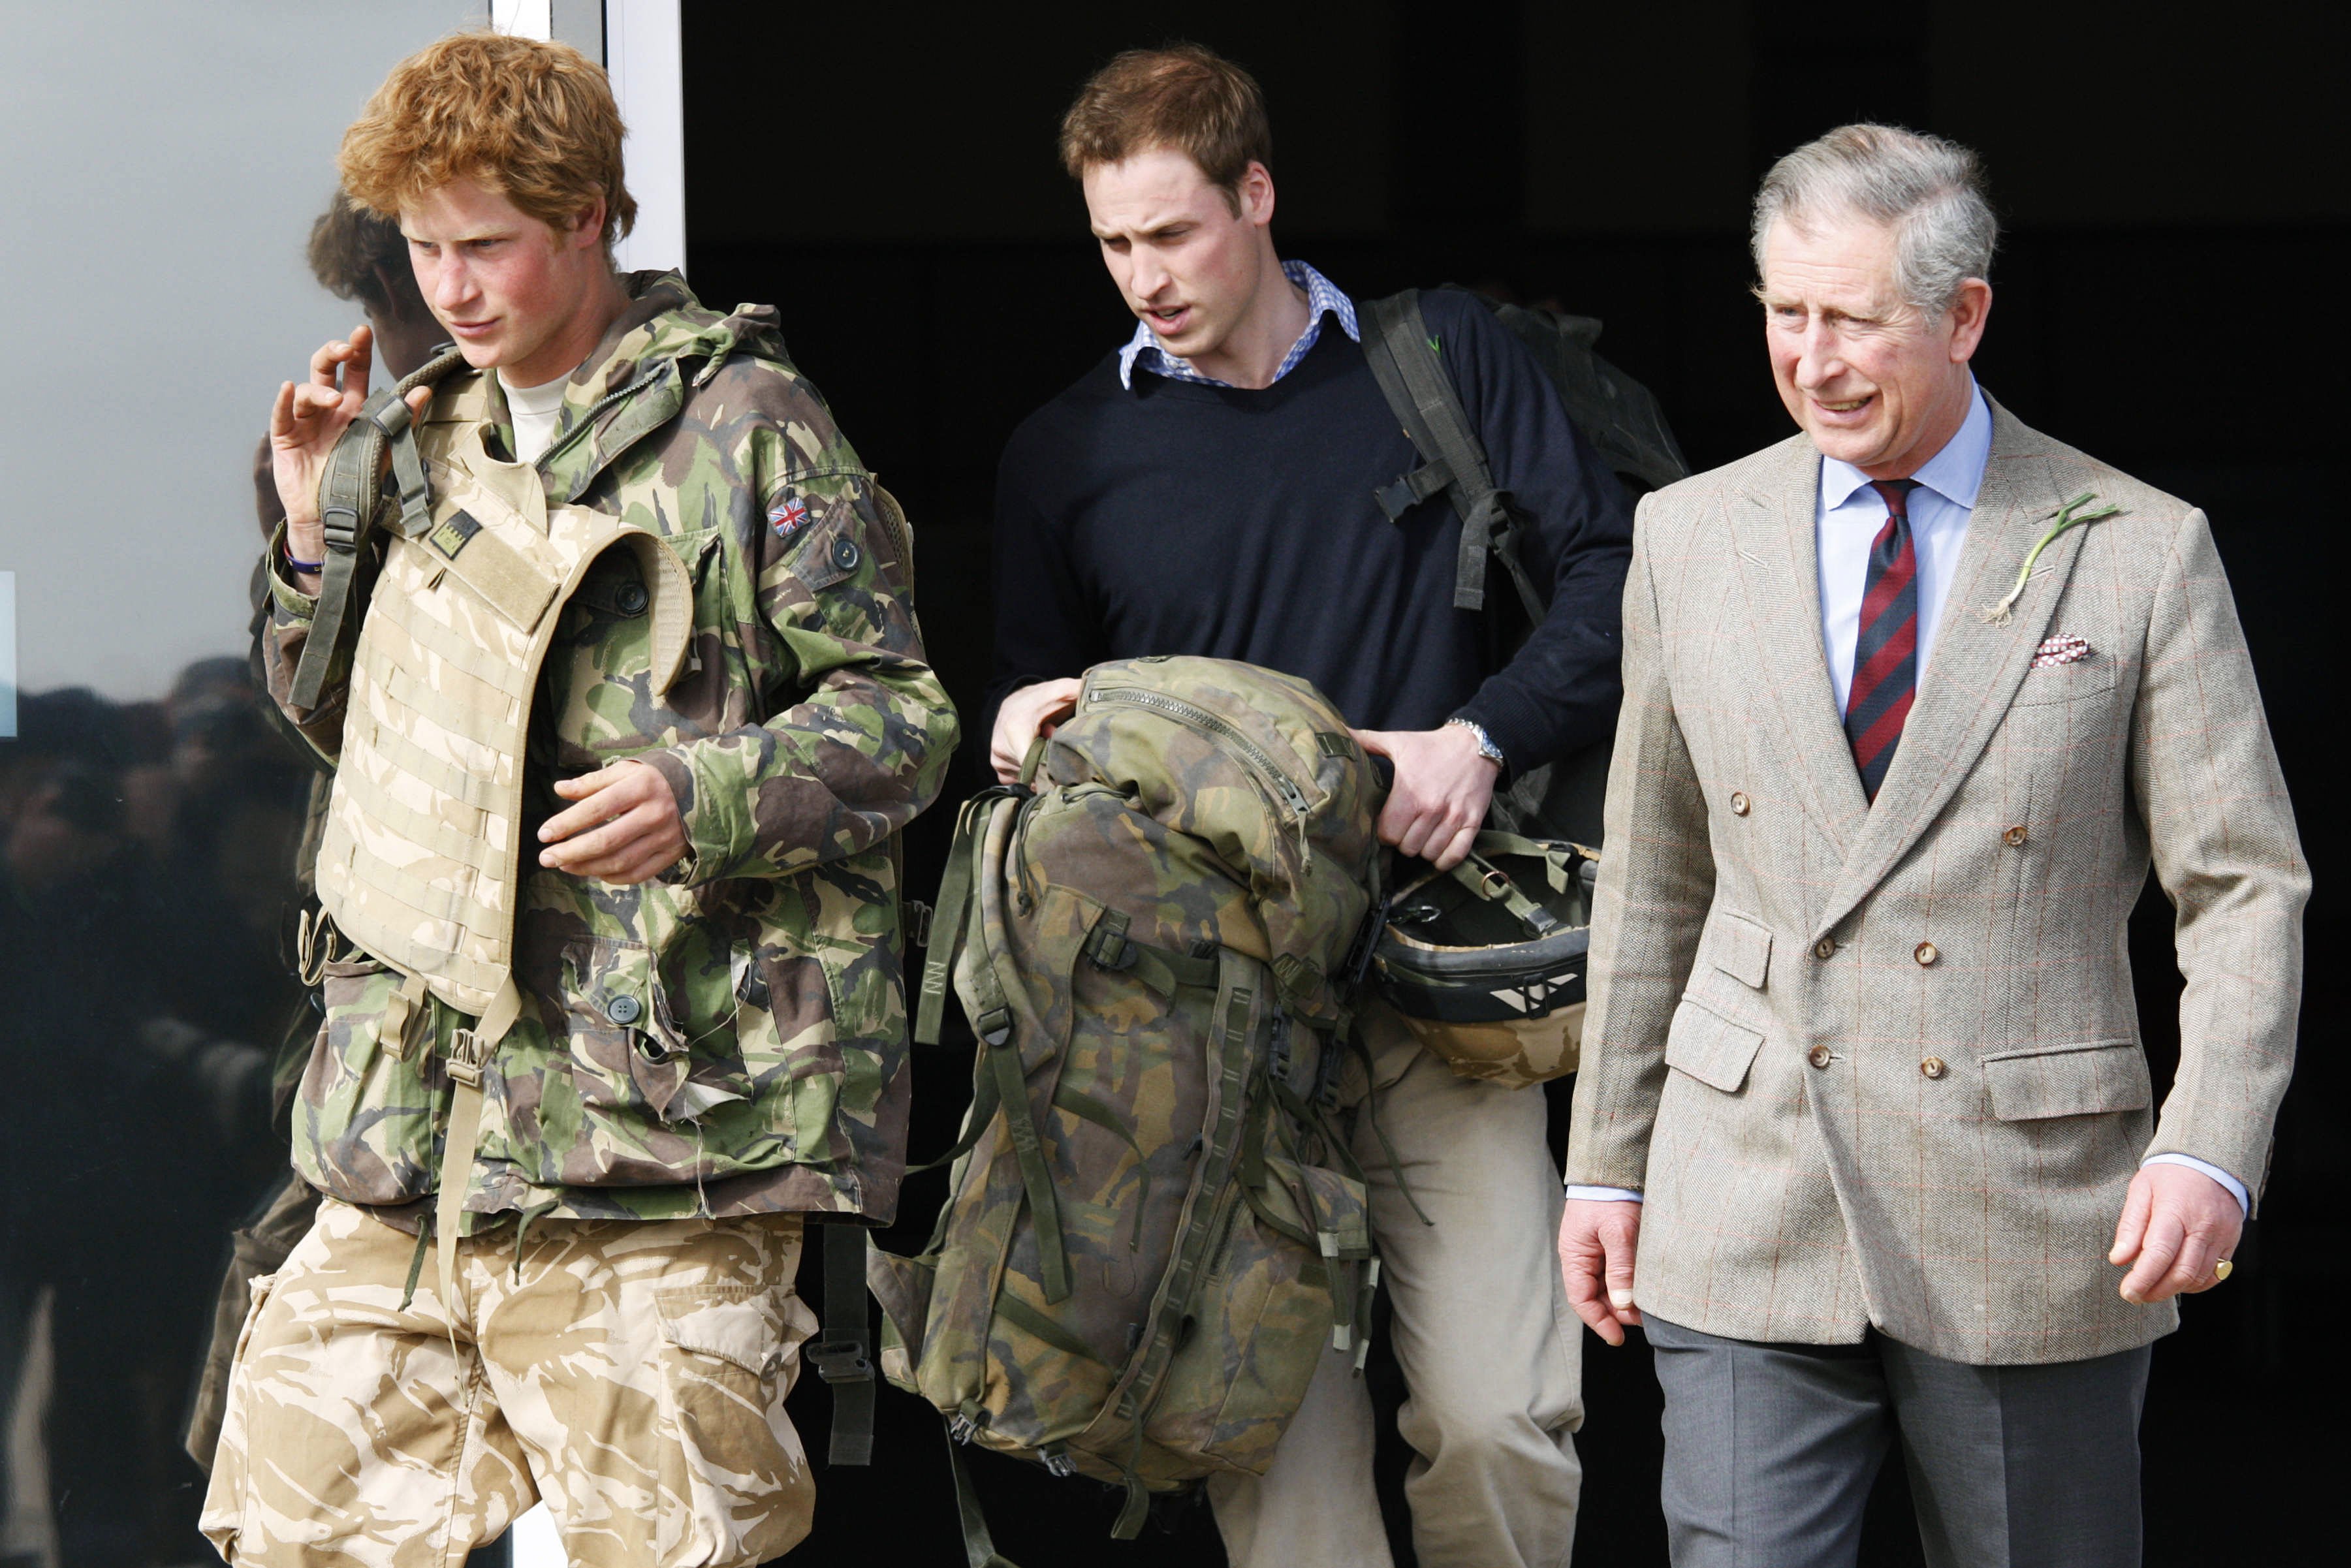 Prince Harry, Prince Charles, and Prince William as Harry returns to Britain at Royal Air Force RAF Brize Norton airbase after active service in Afghanistan on March 1, 2008, in Oxfordshire, England | Source: Getty Images